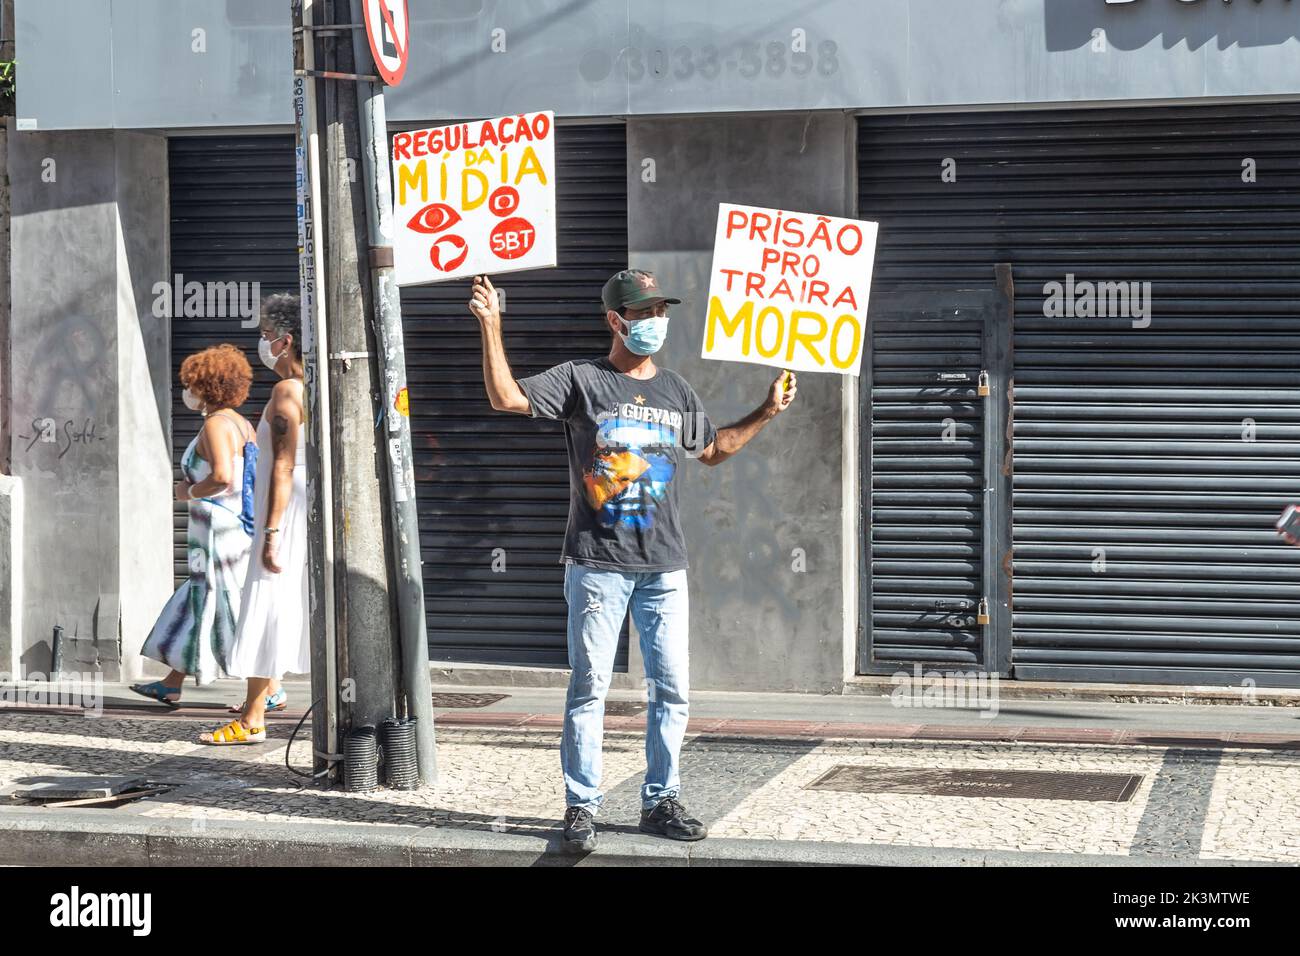 Salvador, Bahia, Brazil - November 20, 2021: Brazilians protest carrying posters against the government of President Jair Bolsonaro in the city of Sal Stock Photo